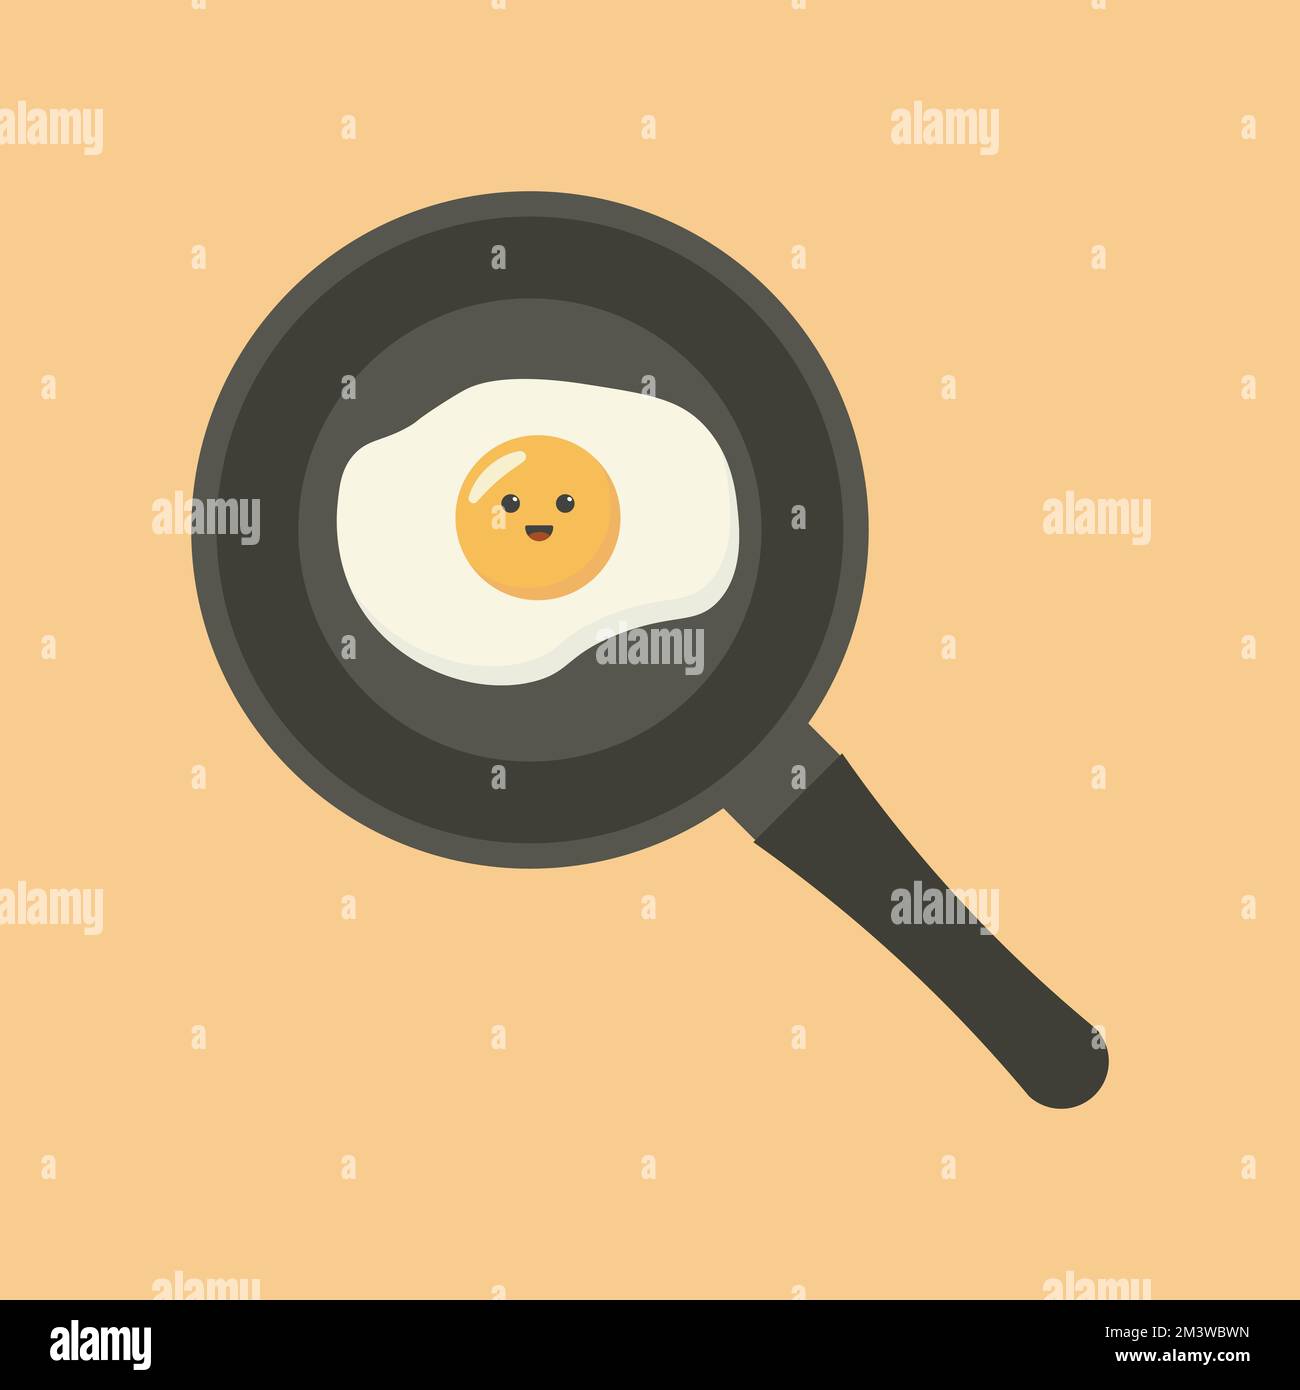 https://c8.alamy.com/comp/2M3WBWN/cute-fried-egg-on-frying-pan-healthy-morning-breakfast-with-egg-vector-illustration-2M3WBWN.jpg